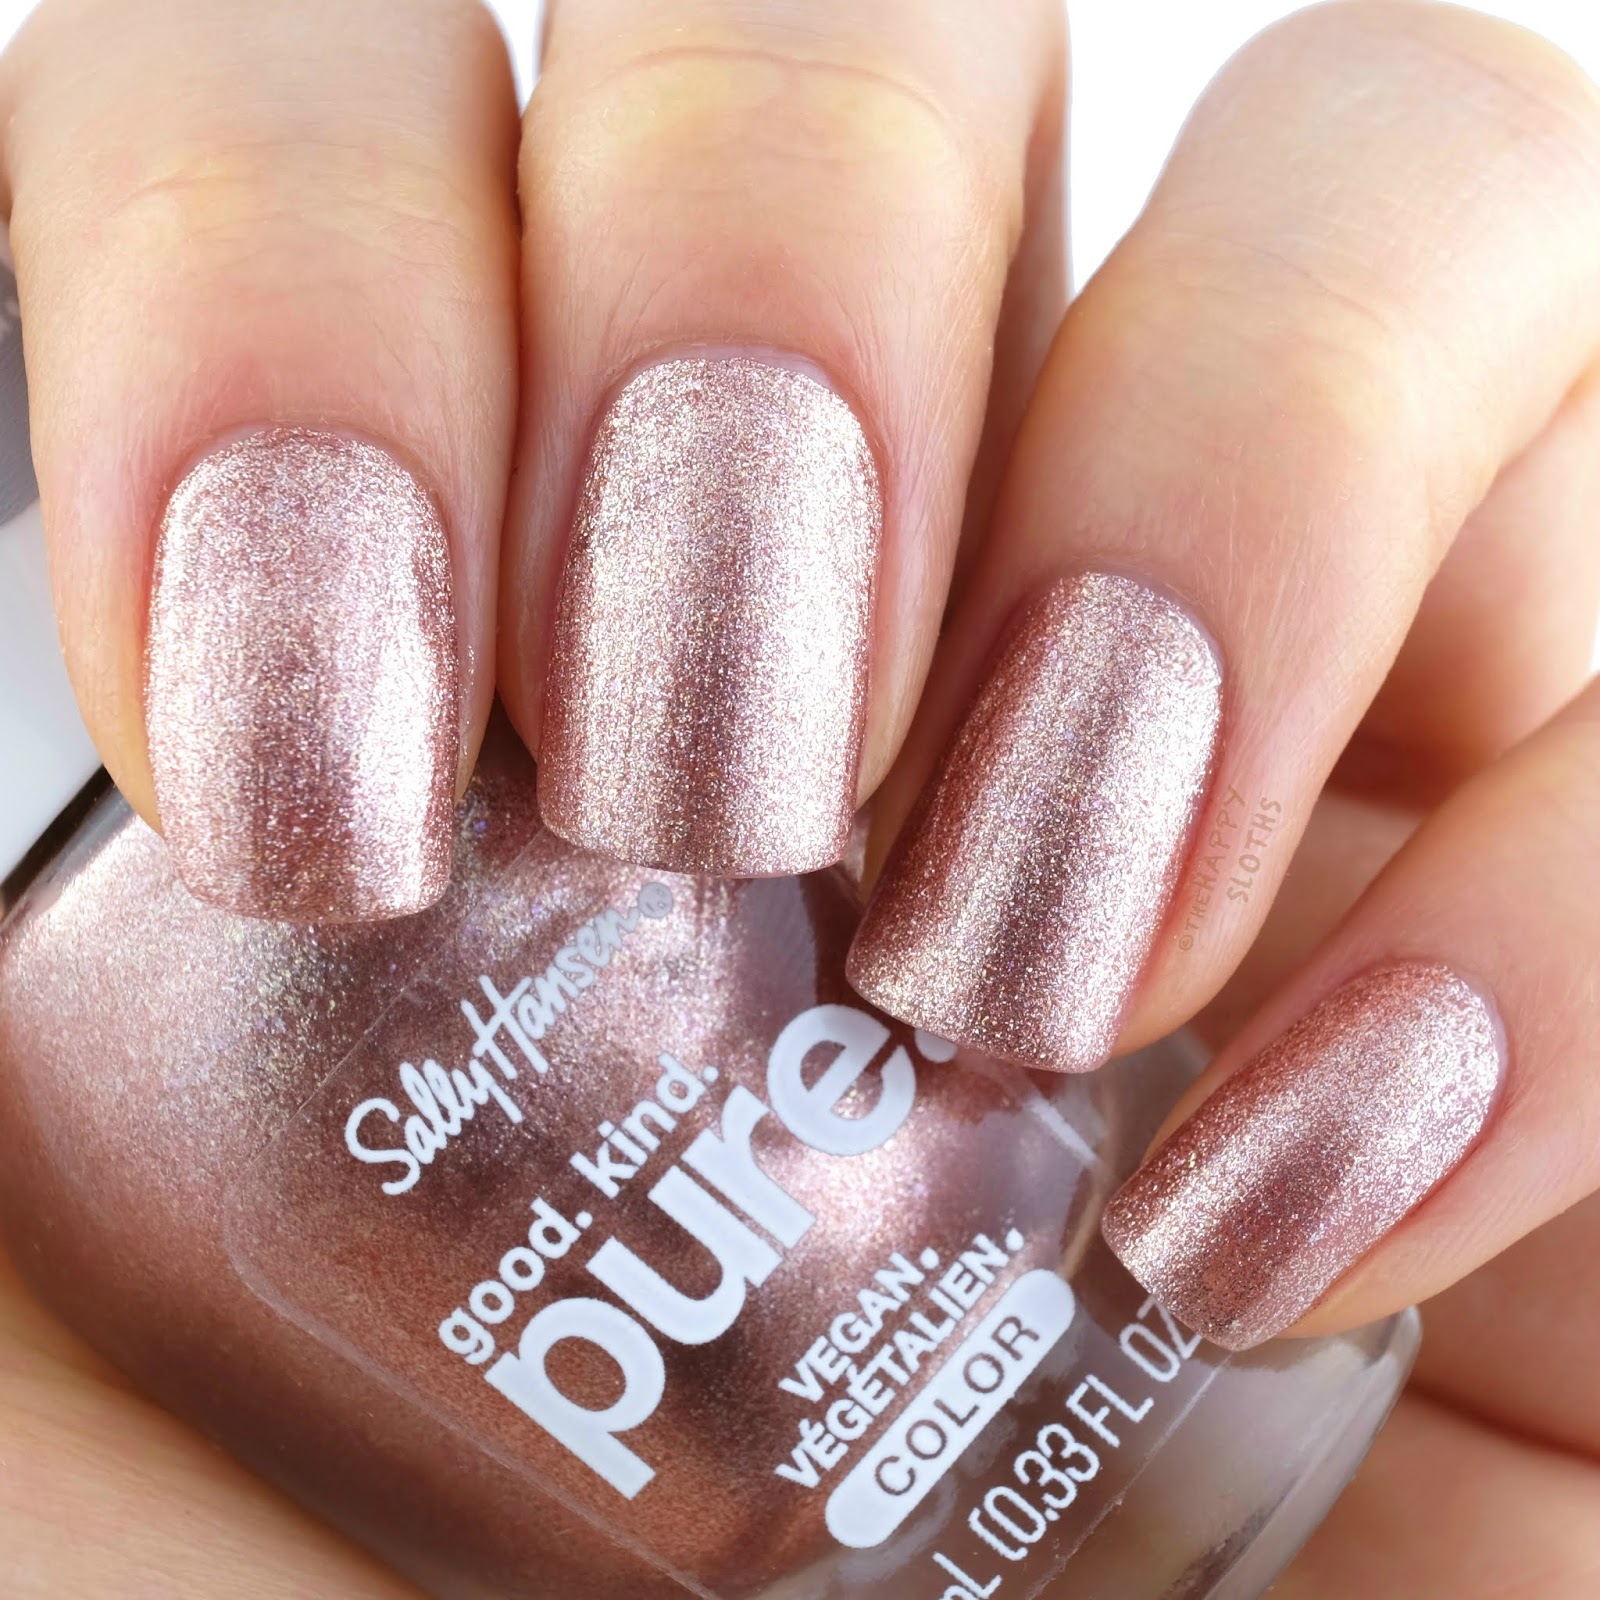 Sally Hansen | Good. Kind. Pure. Nail Polish in "240 Golden Quartz": Review and Swatches